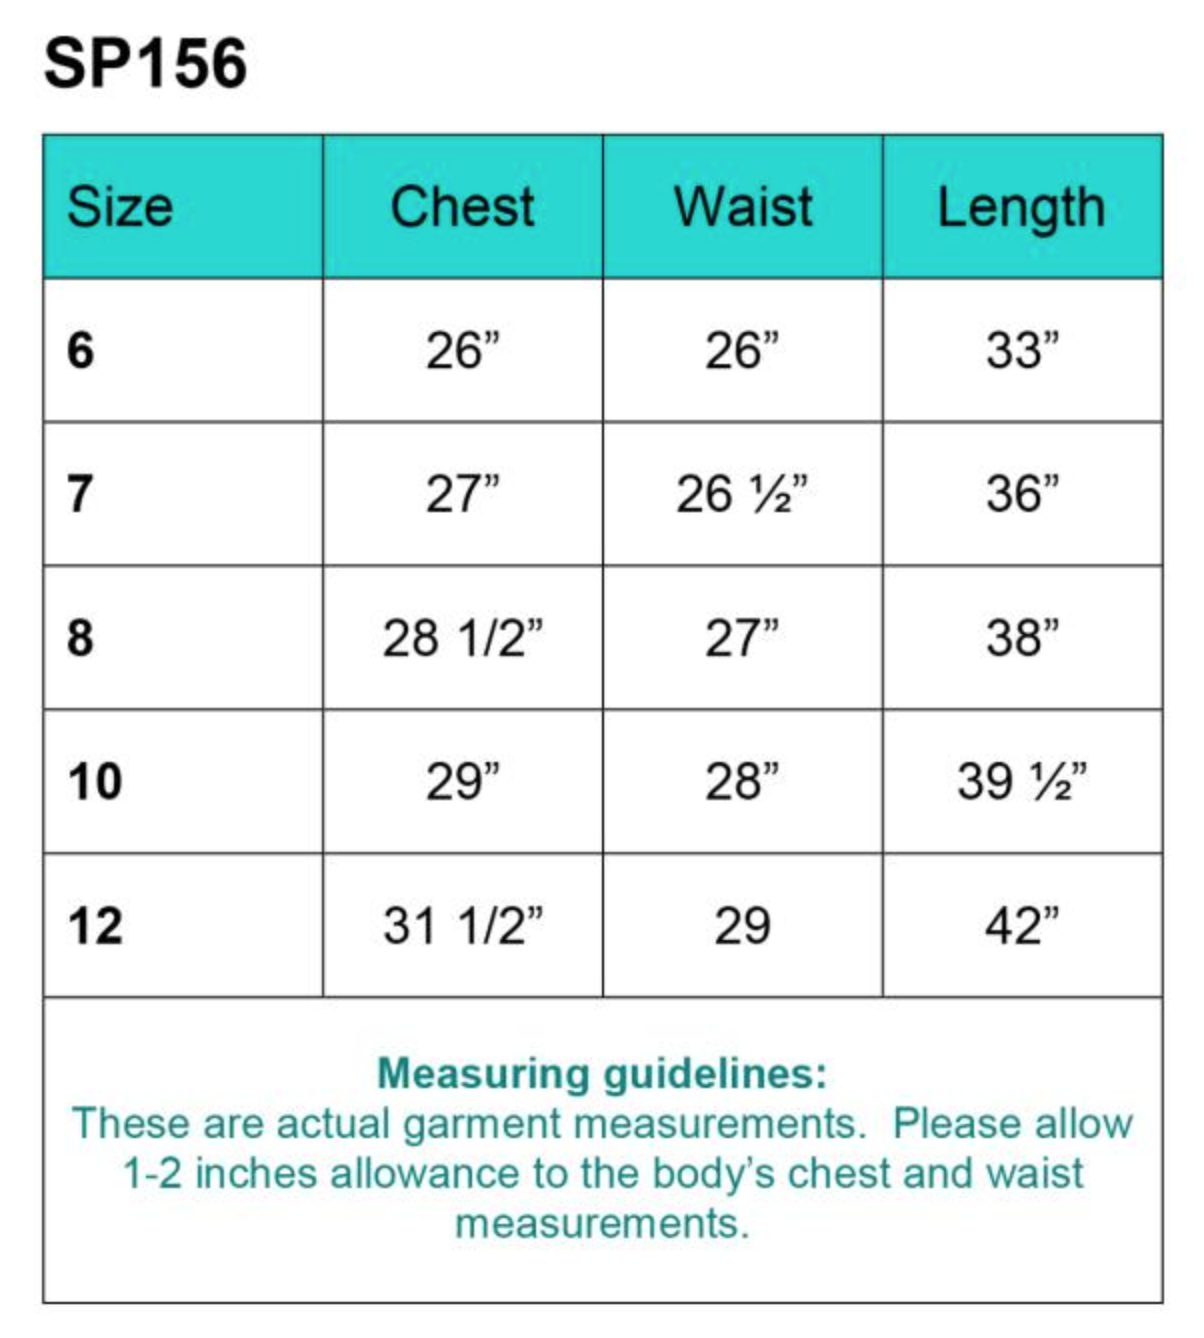 sizing-chart-sp156.png